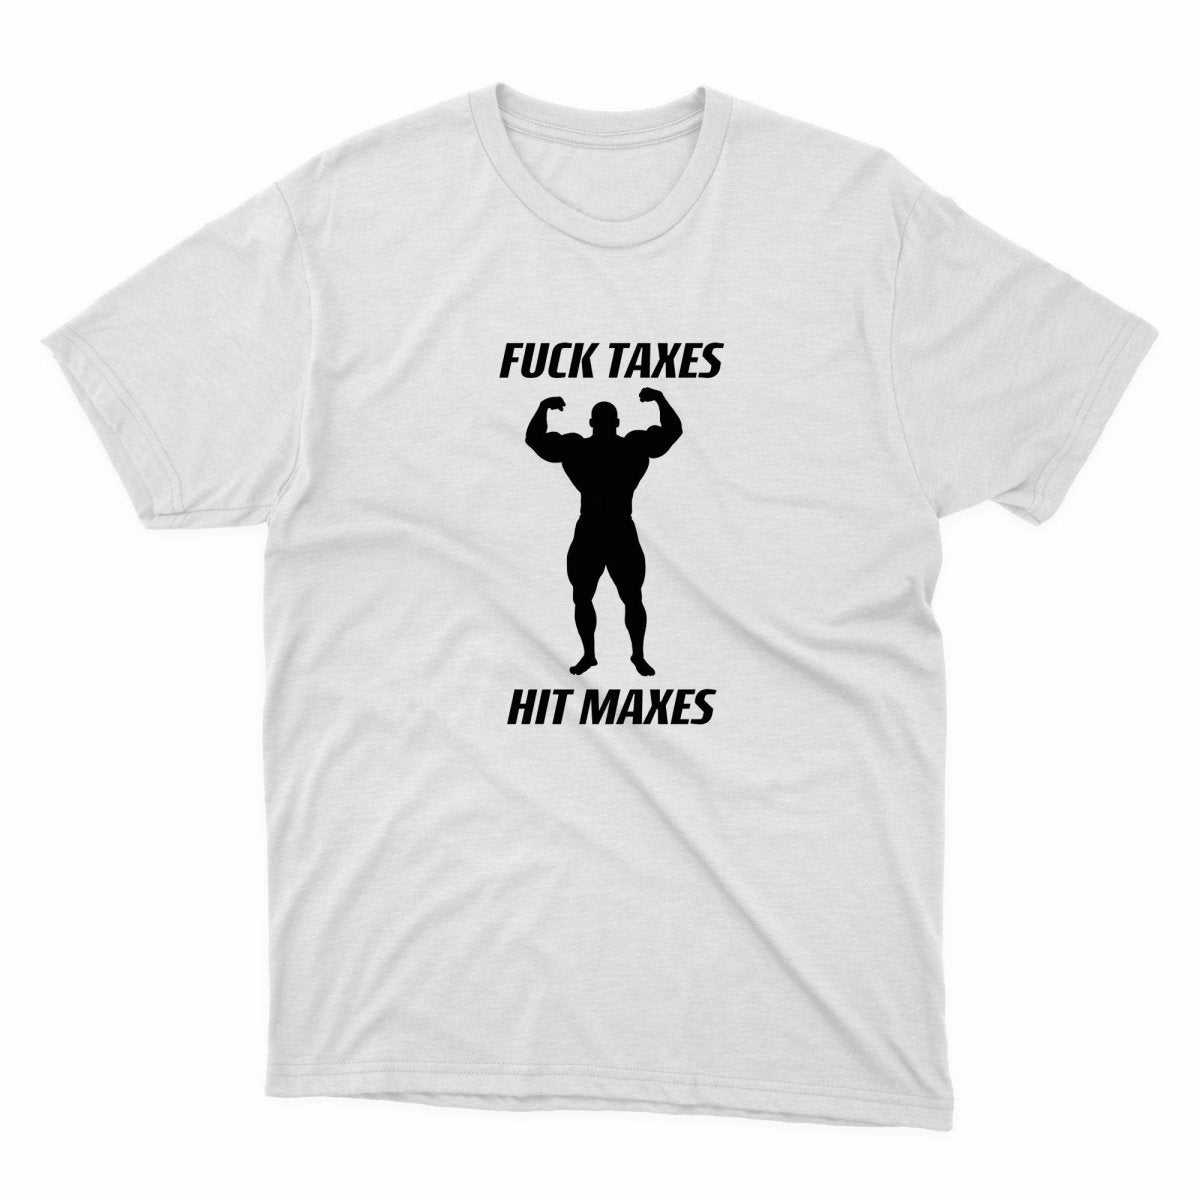 Fuck Taxes Hit Maxes Shirt - stickerbullFuck Taxes Hit Maxes ShirtShirtsPrintifystickerbull61443967338163457551WhiteSa white t - shirt with a silhouette of a man lifting a barbell